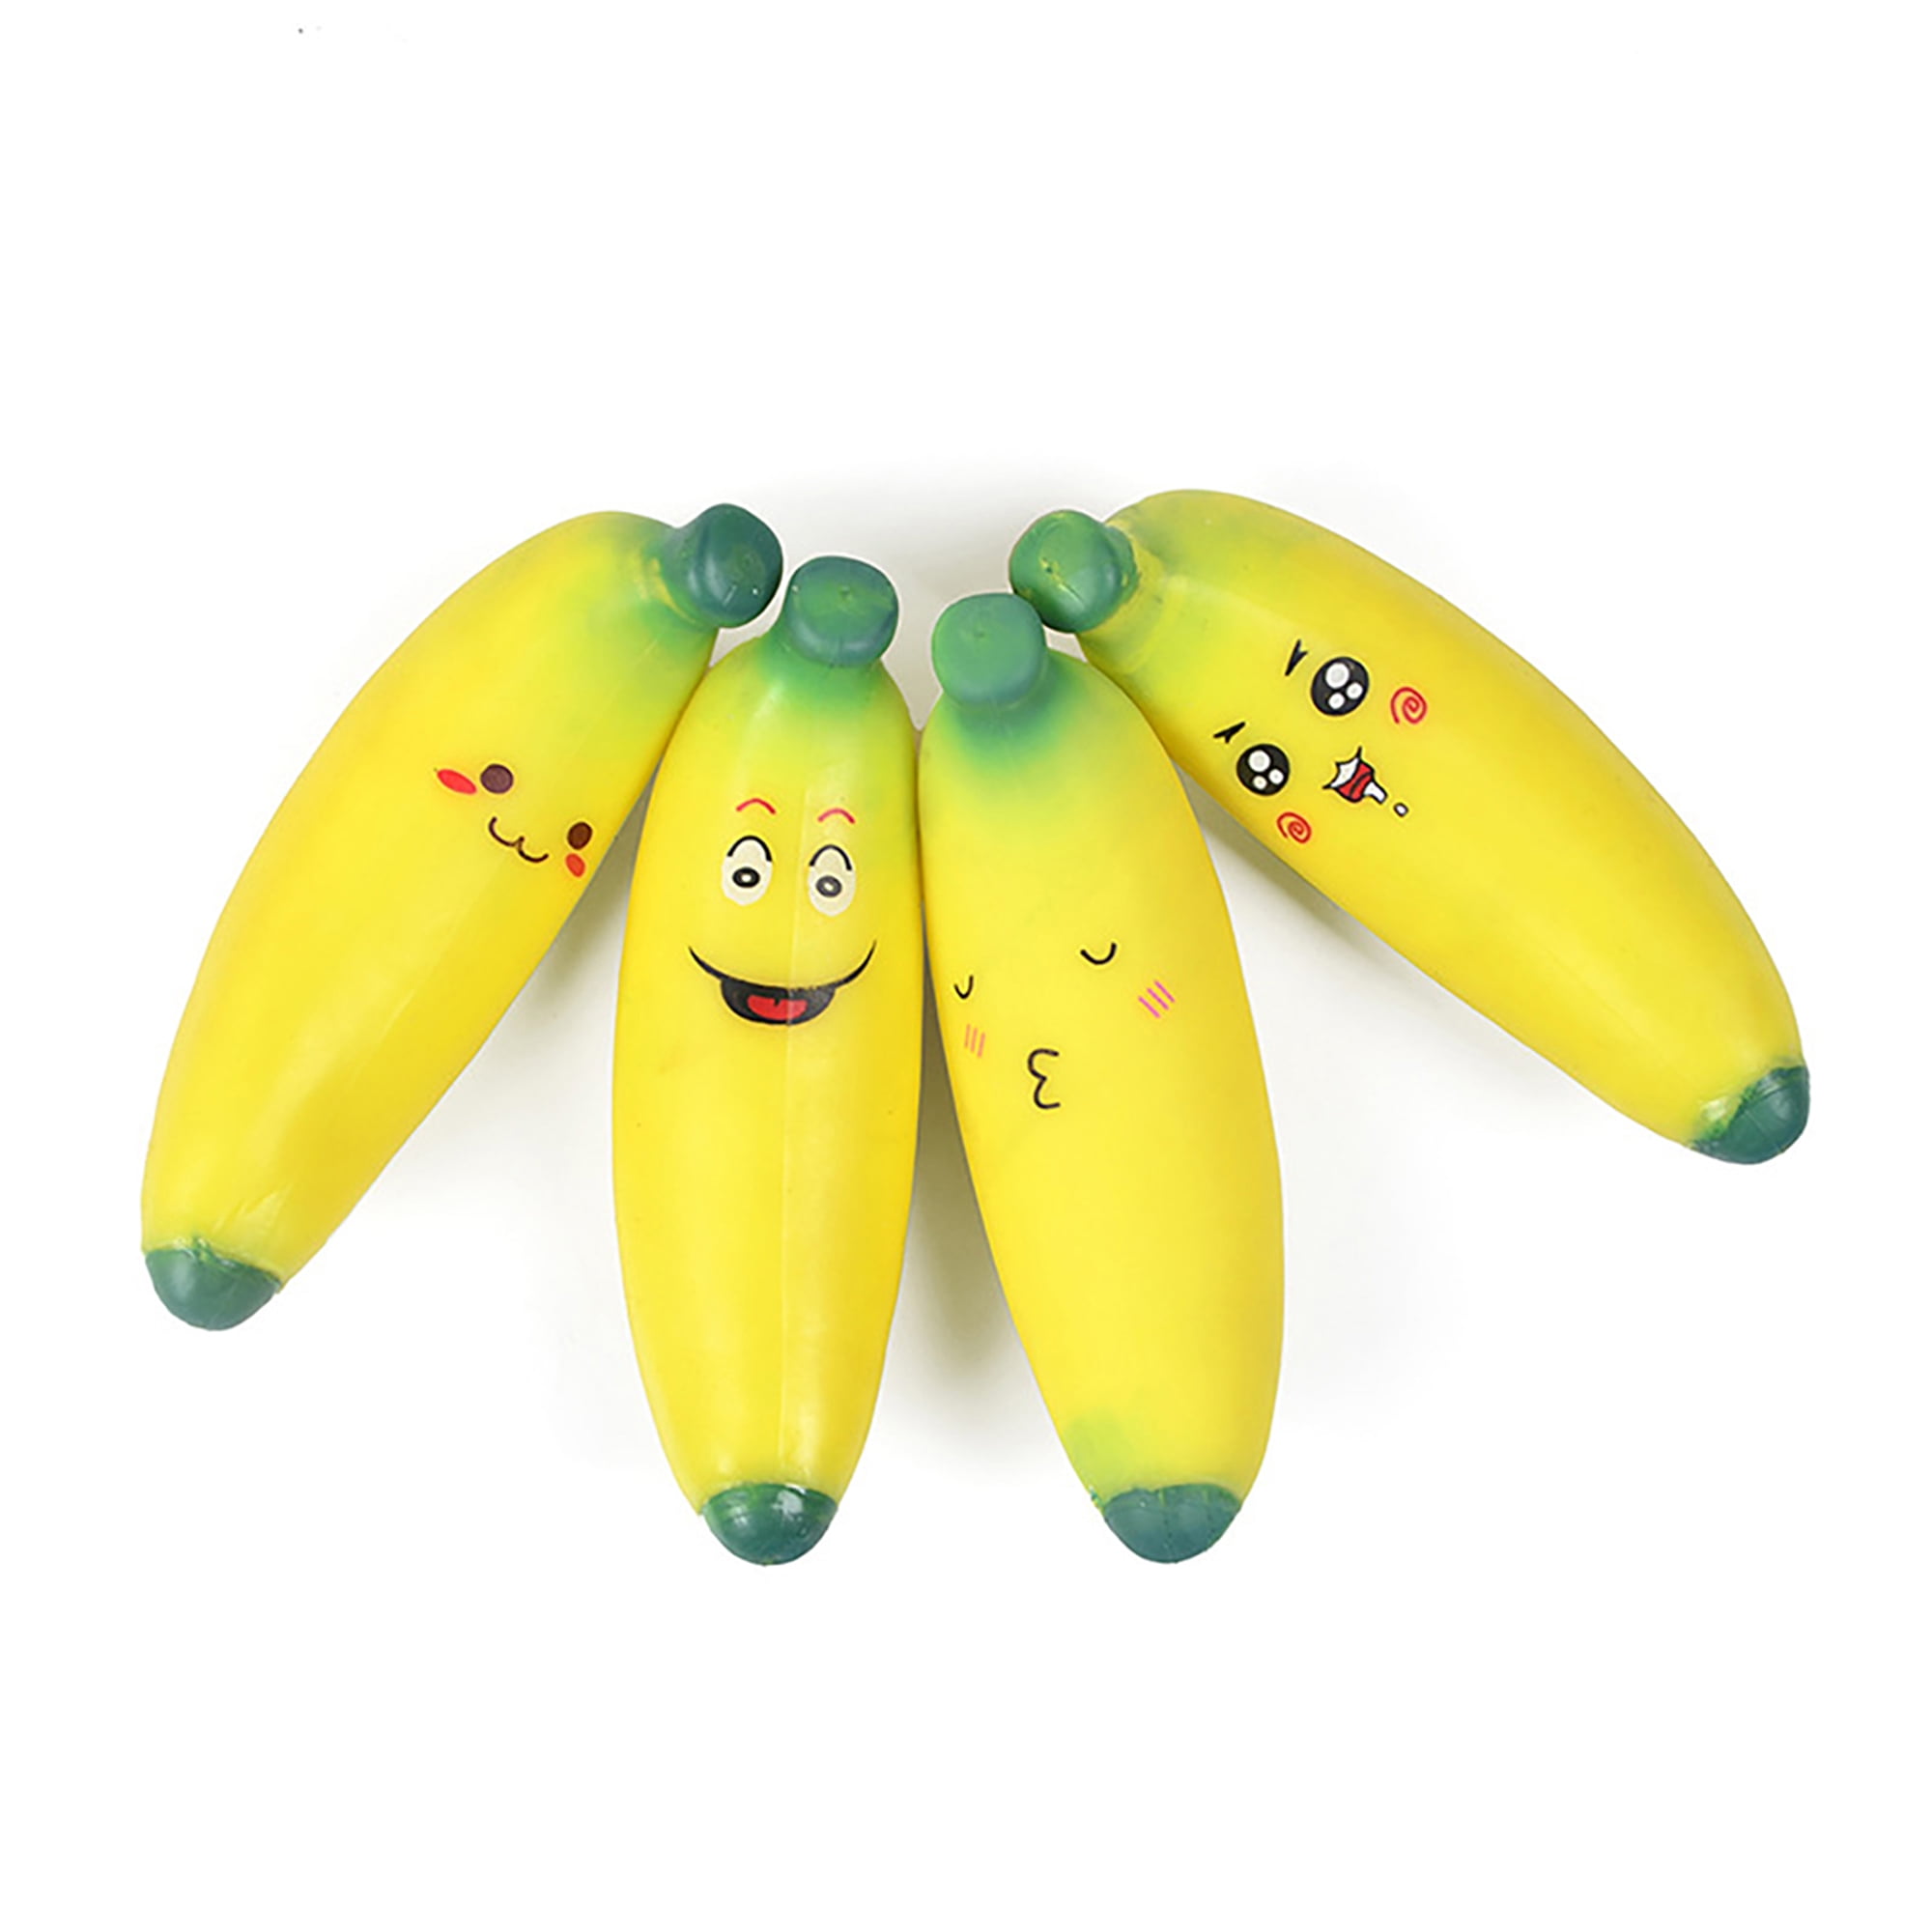 N Pocket Fake Banana Fruit Simulation Squeeze Stress Relief Kids Adult Toy Gift 